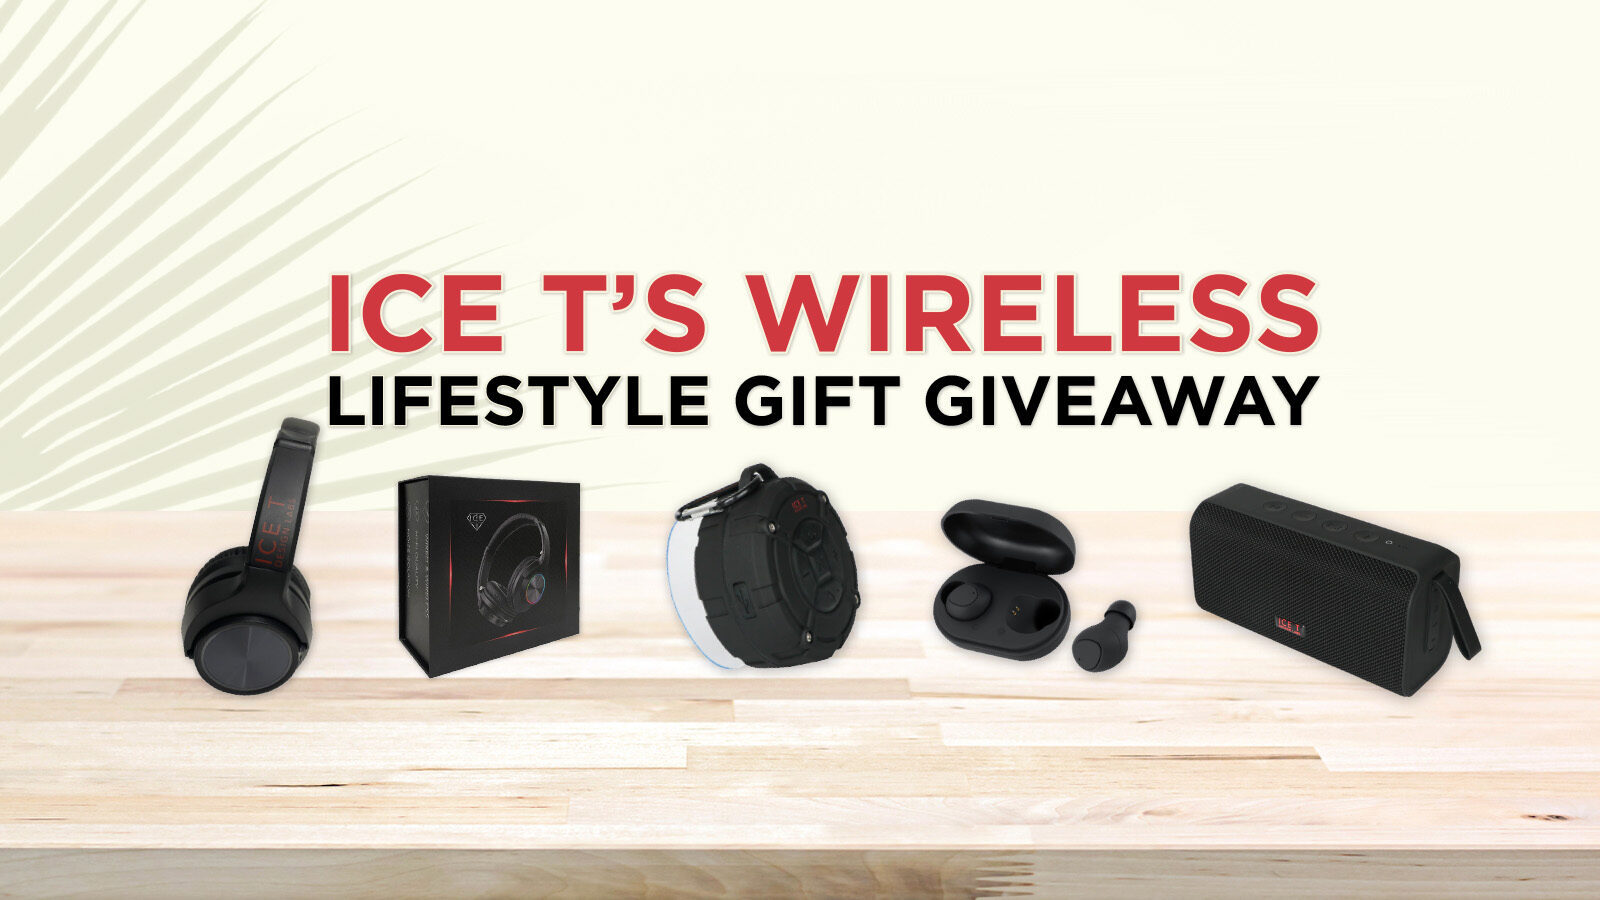 Ice T’s Wireless Lifestyle Gift Giveaway